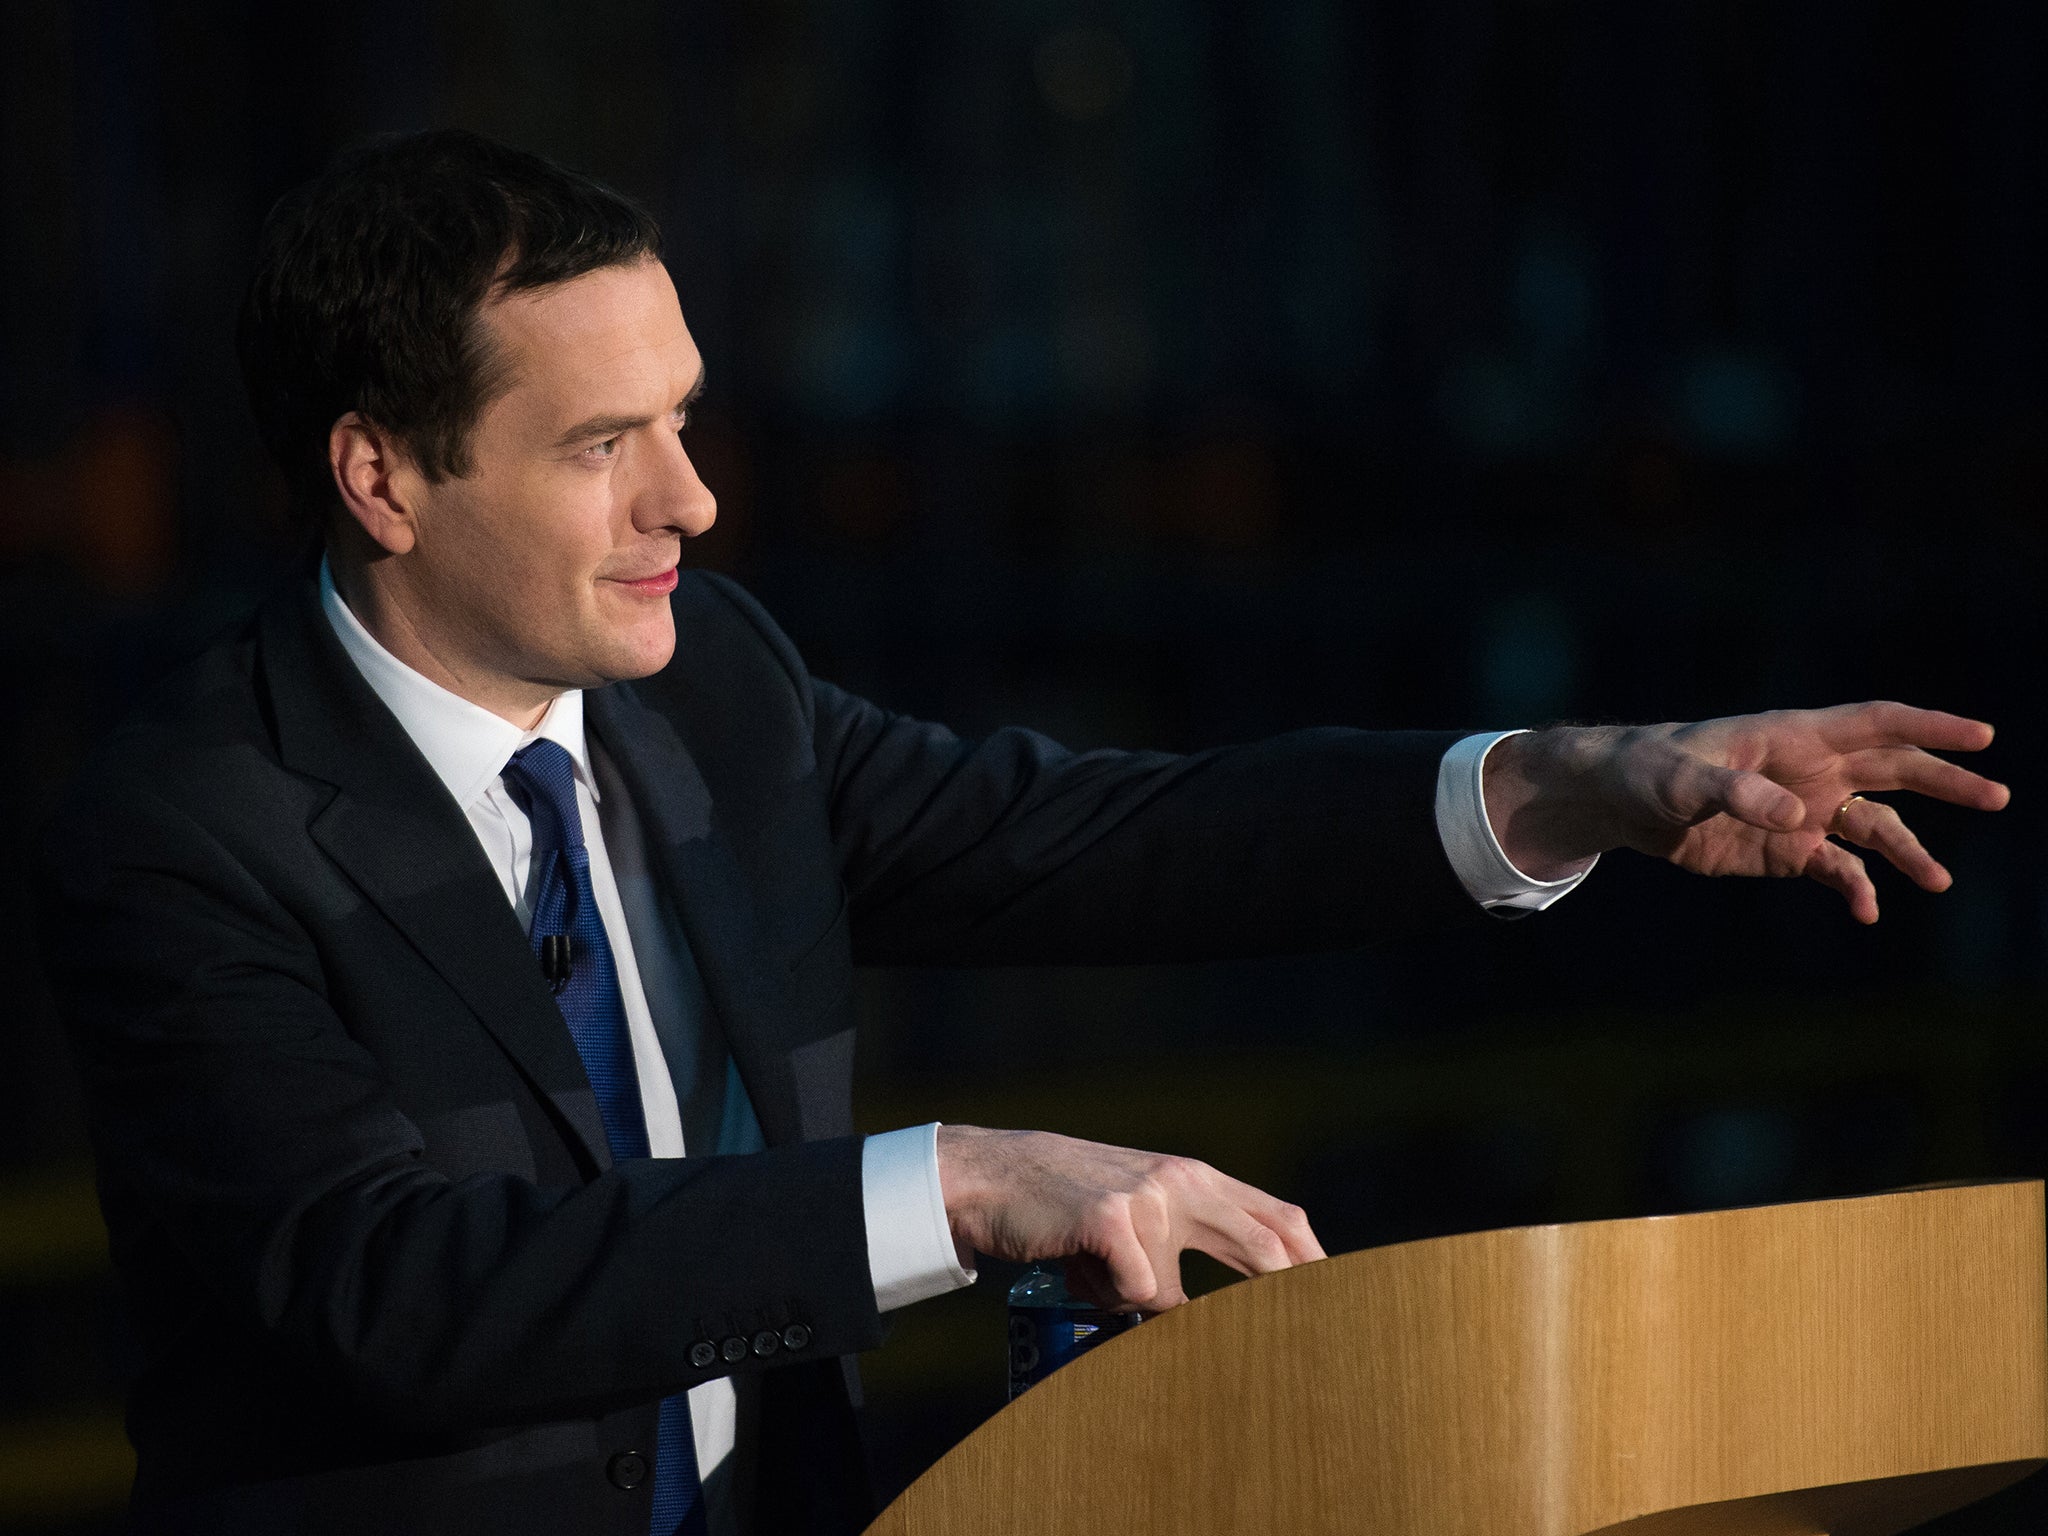 George Osborne has been warned that his planned cuts will leave services “gutted”